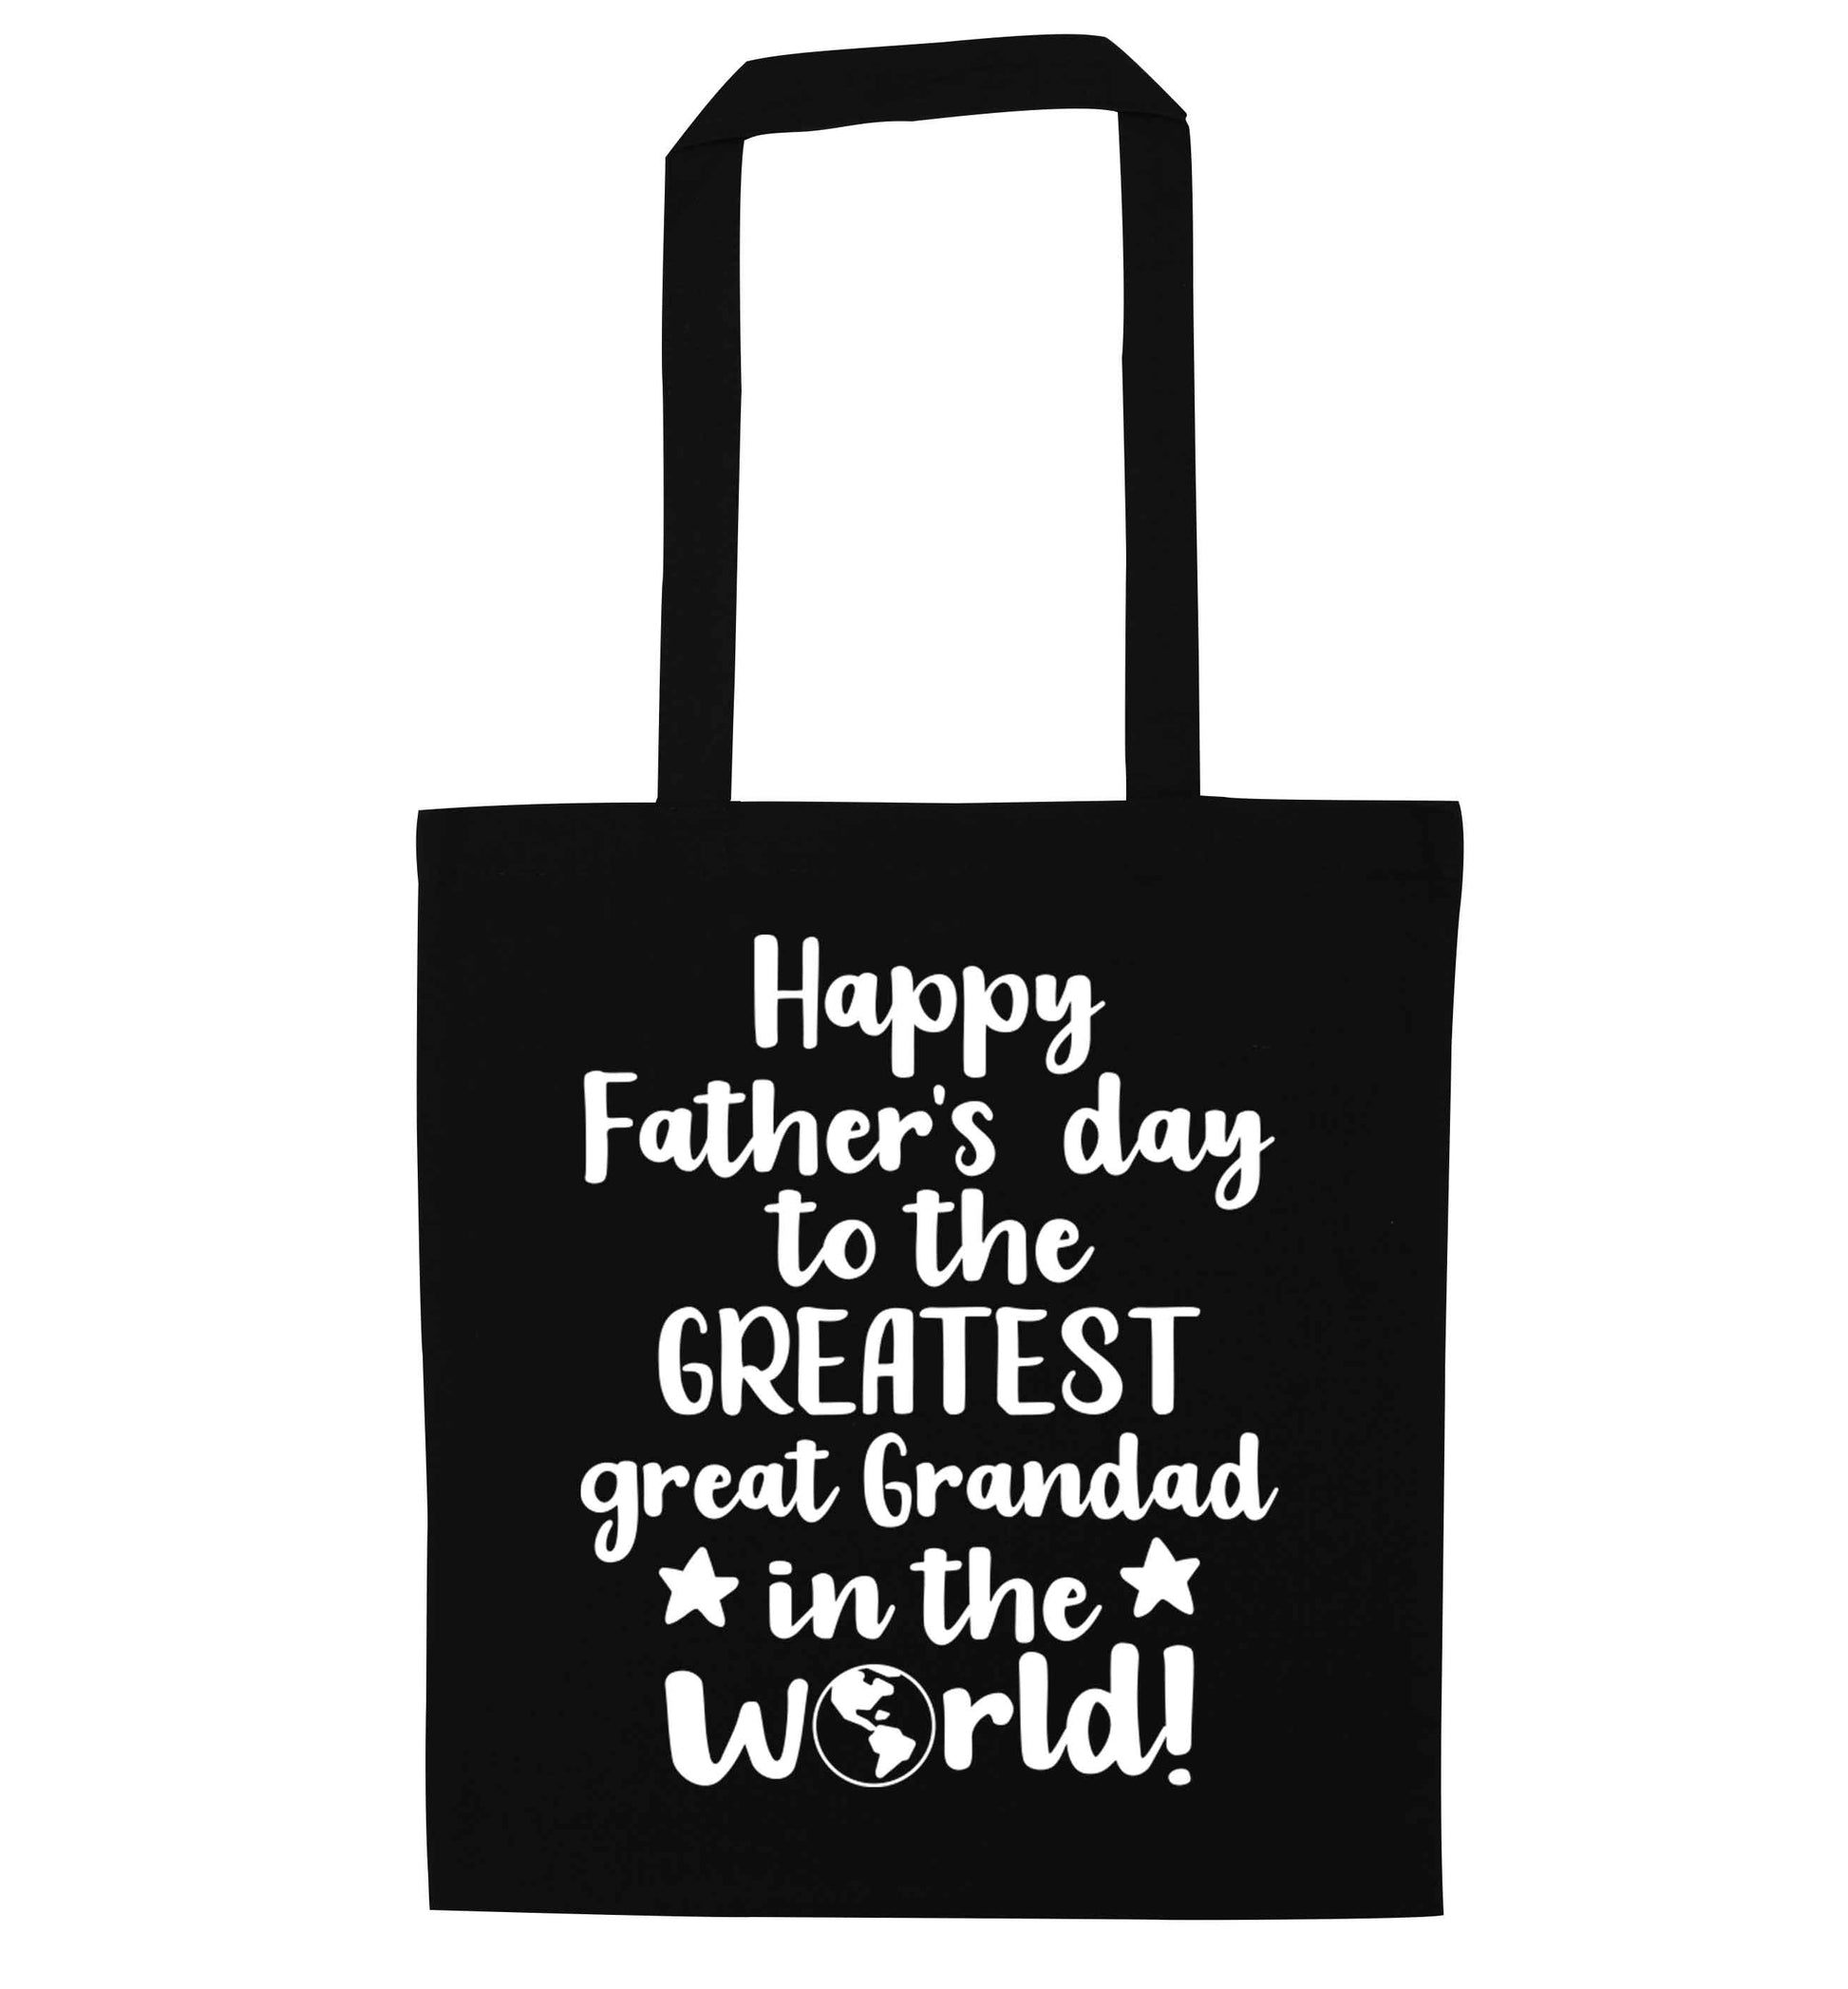 Happy Father's day to the greatest great grandad in the world black tote bag